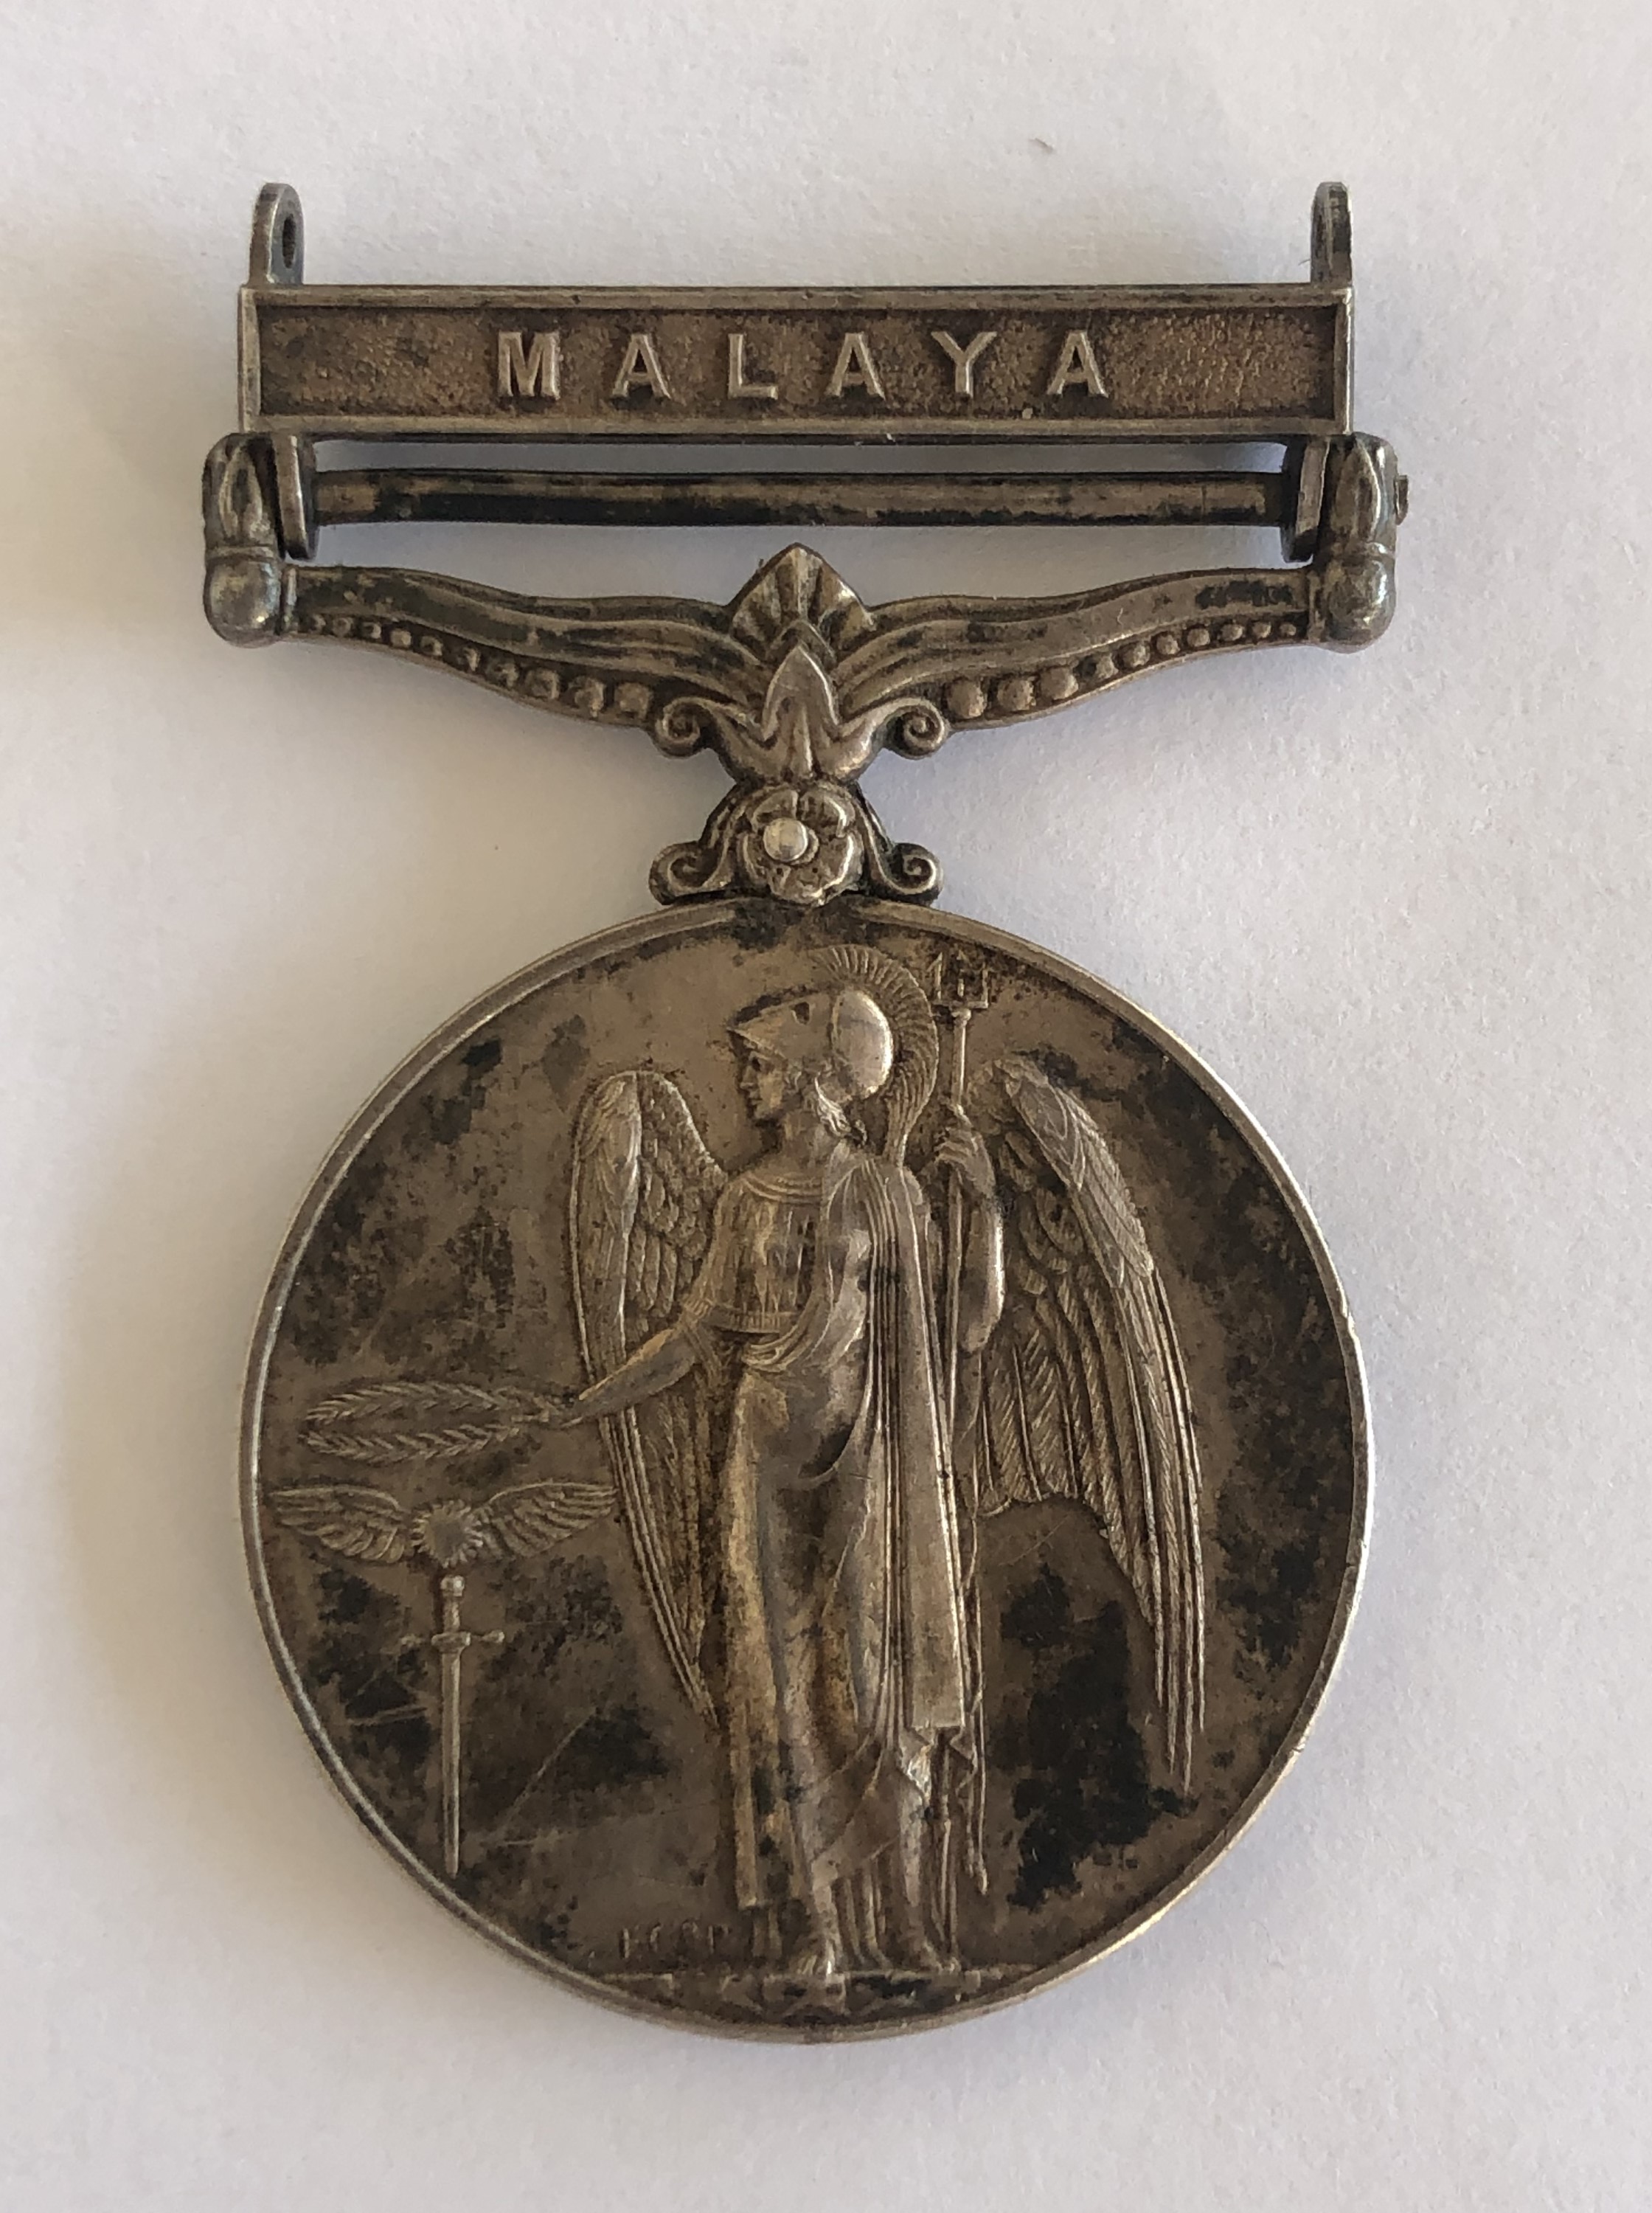 A General Service Medal with Malaya clasp to 22276863 Rfn G Rockley, Cameronians